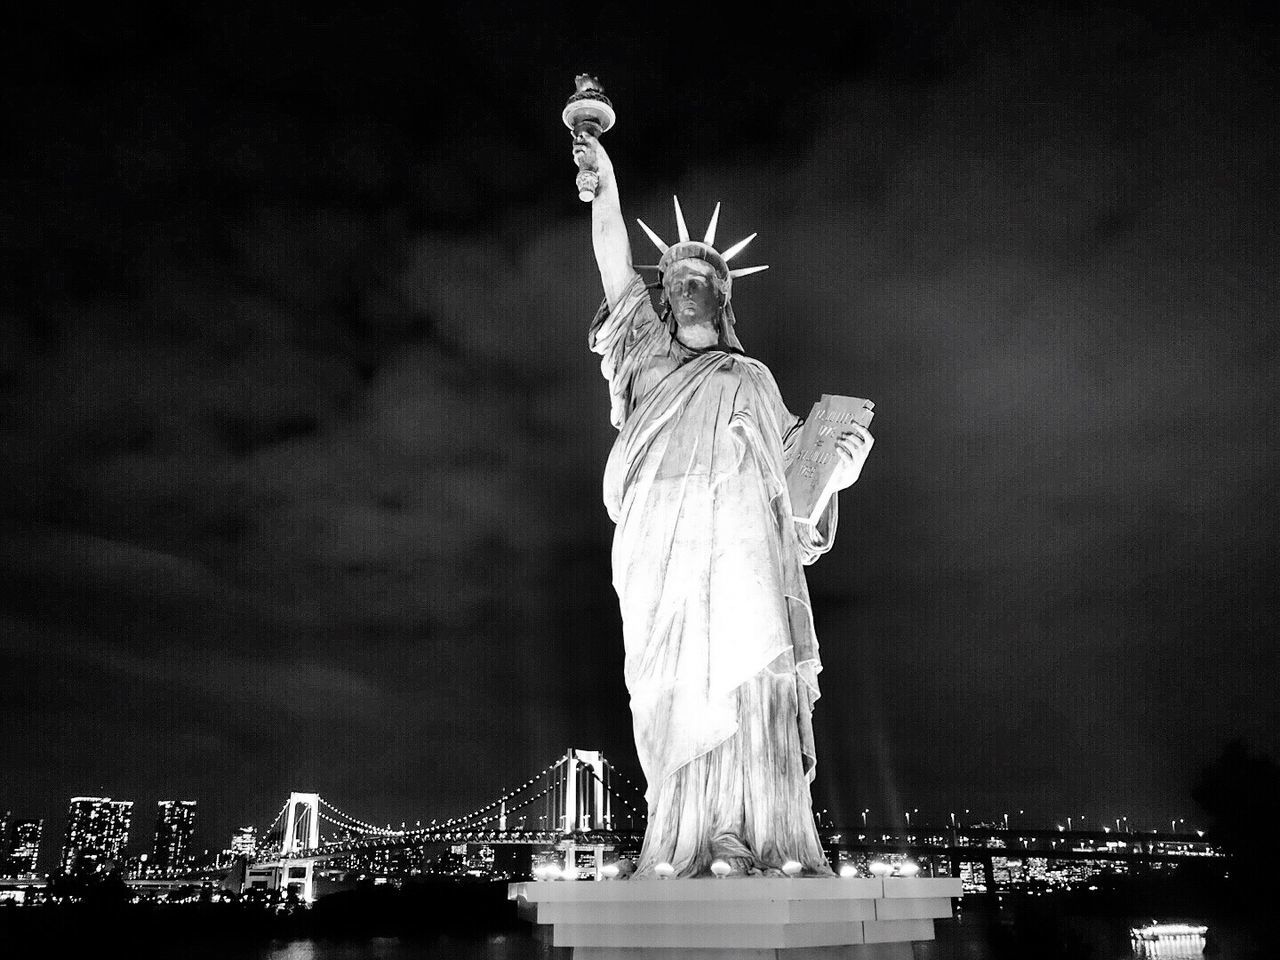 Illuminated statue of liberty by bridge against sky at night